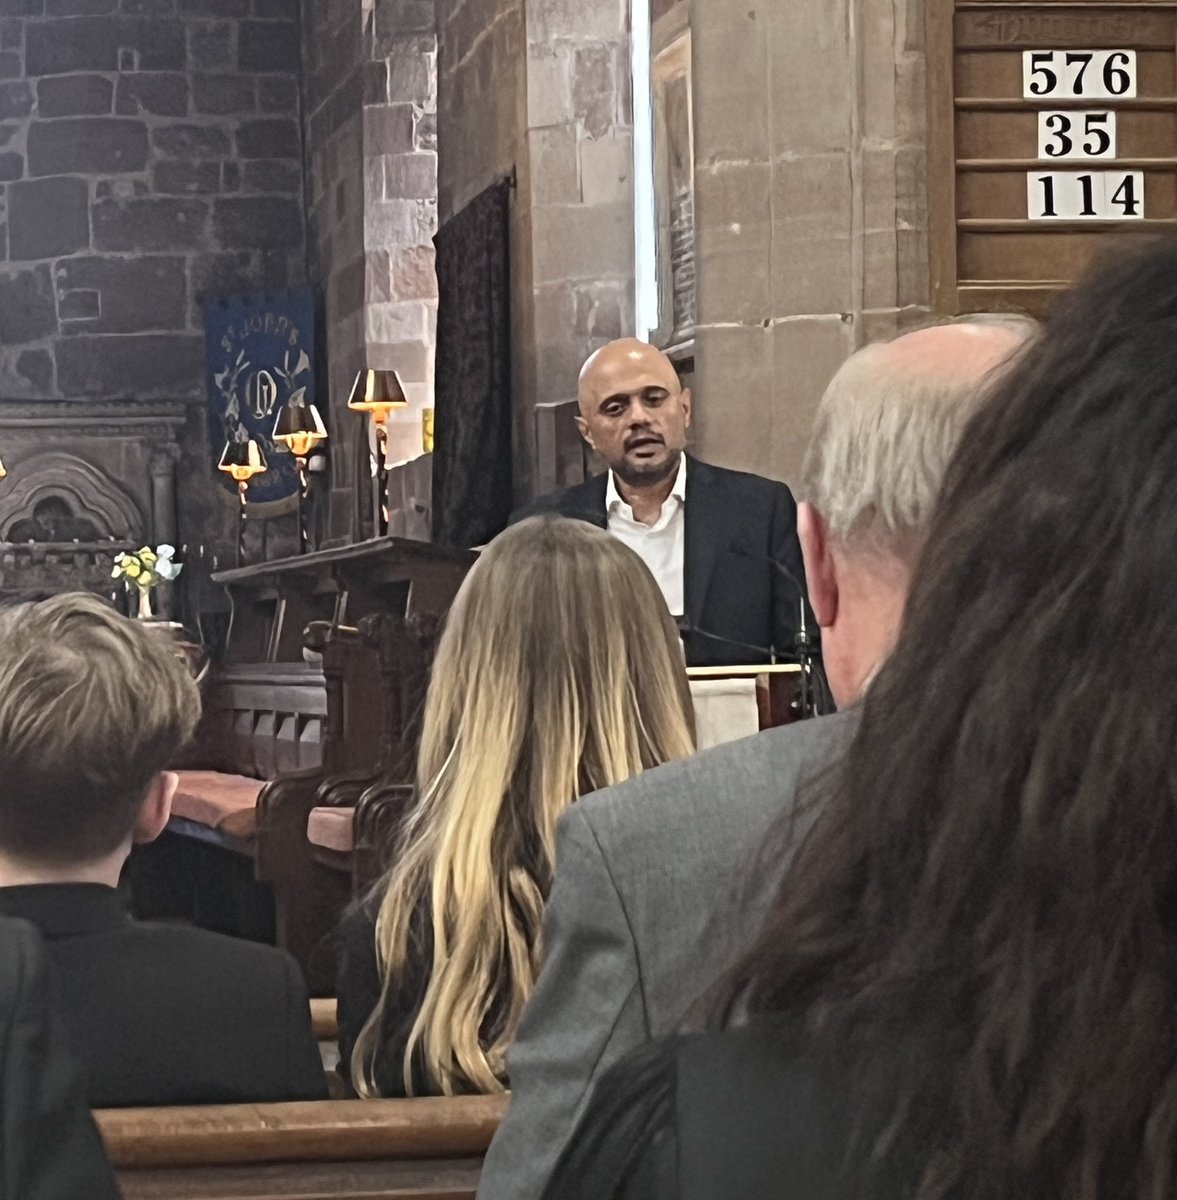 Excellent lunch with @FriendsStJohns in #Bromsgrove listening to @sajidjavid talking about his experience of life at Westminster and his partiality for crisps….. and getting duly excited about the upcoming works on the spire, being expertly delivered by @OA_Architecture